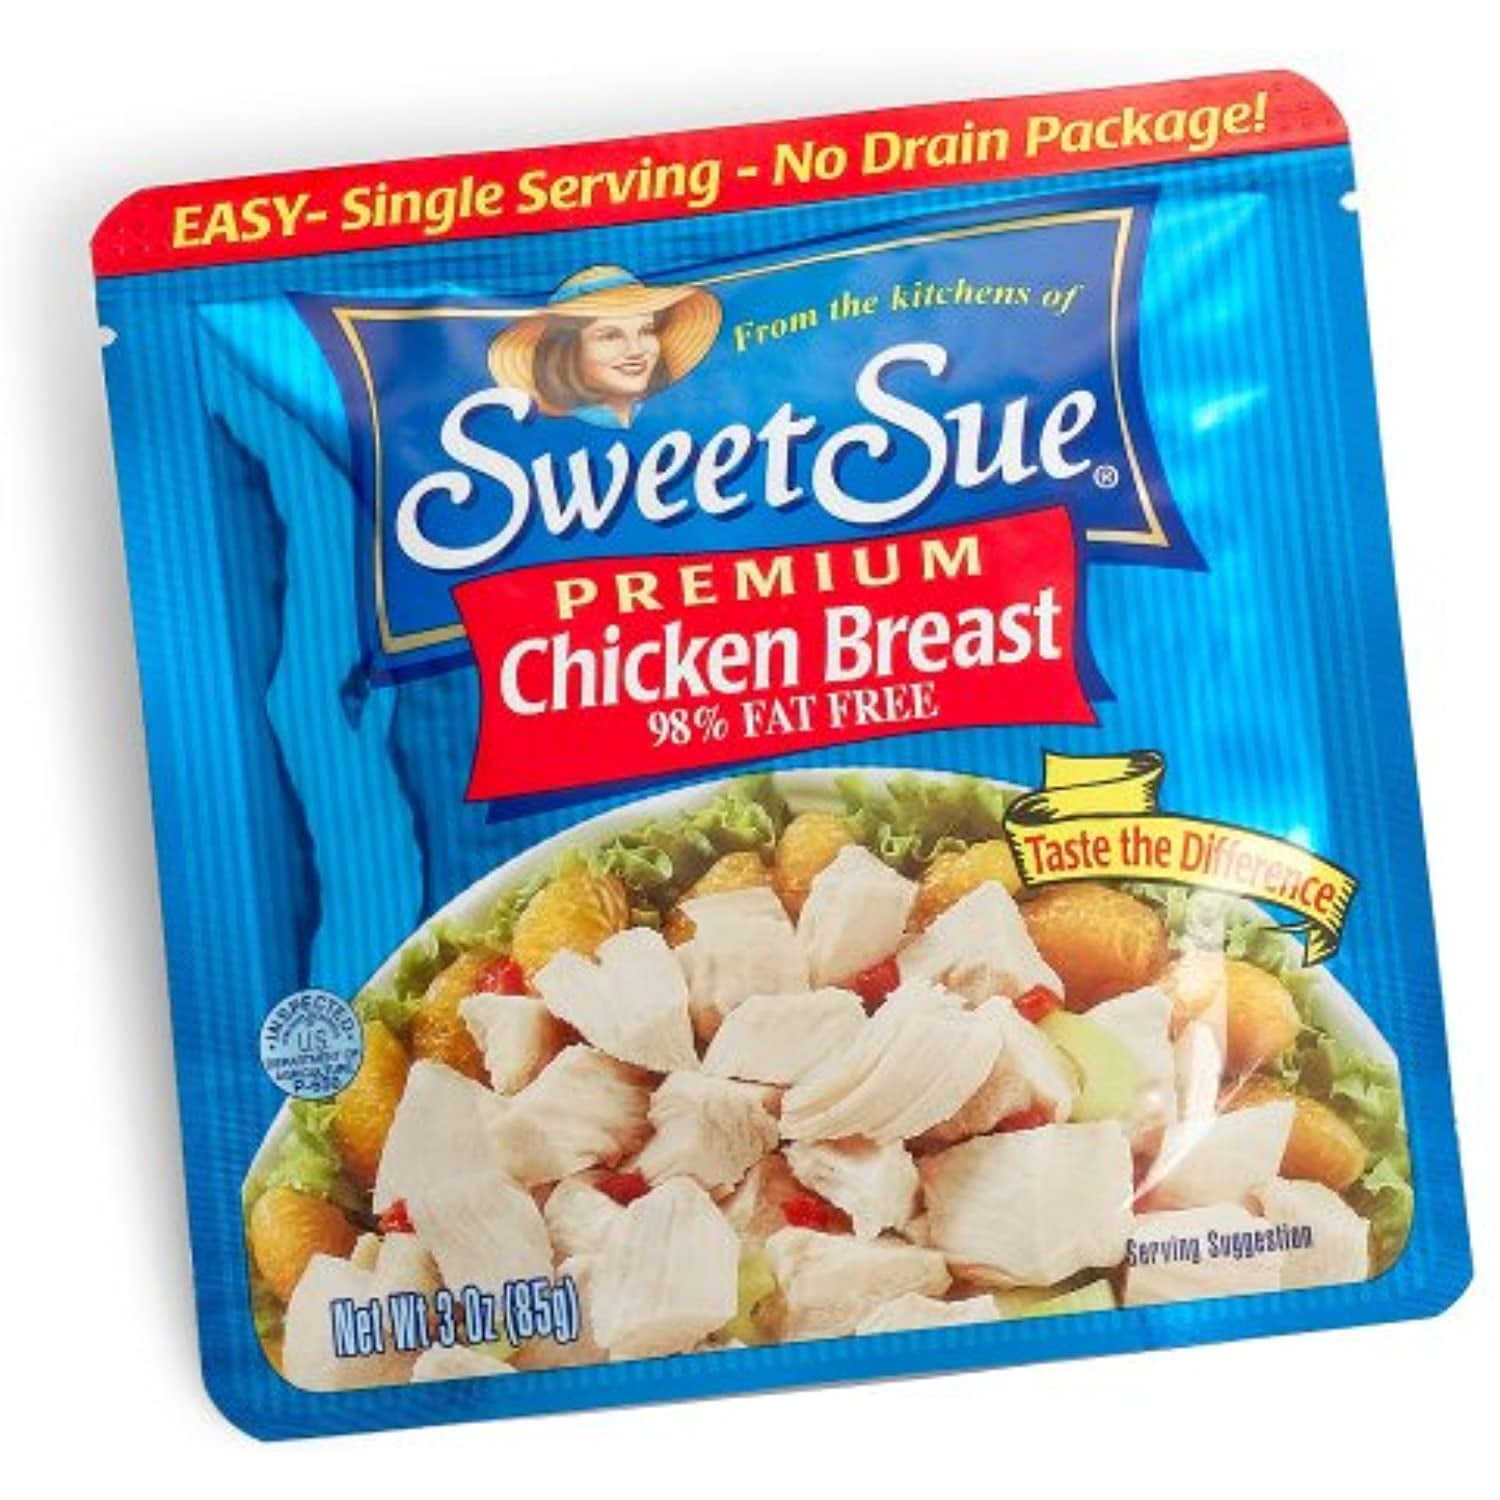 Free Porn Fat Chickens - Sweet Sue Premium Chicken Breast, 3 Oz Ready-To-Eat Pouch (Pack Of 18) -  19G Protein Per Serving, 97% Fat Free - Gluten Free, Keto Friendly - Great  For Snack, Lunch Or Dinner Recipes - Walmart.com